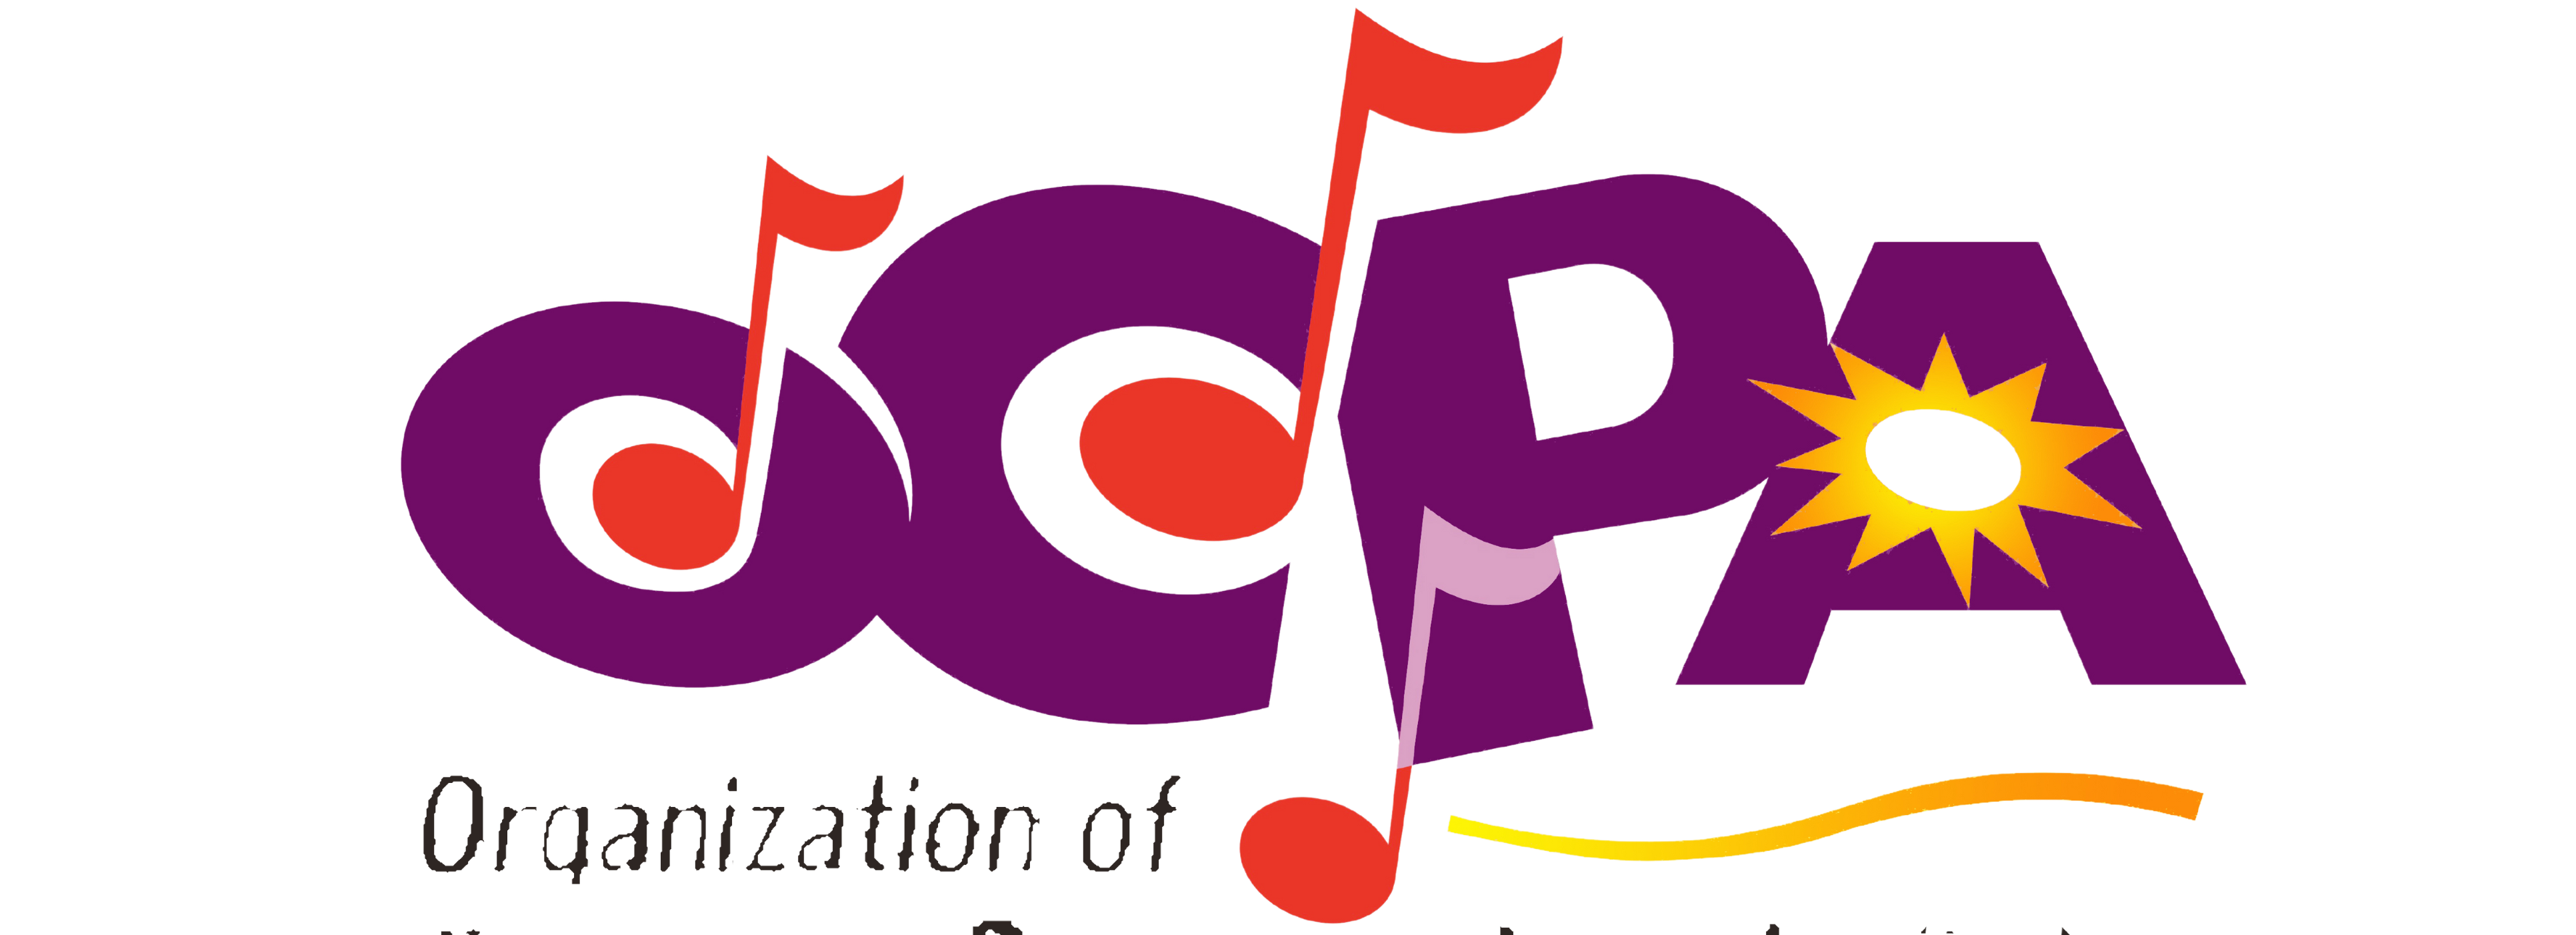 Logo of the organization of calypso performing artists featuring stylized purple and red text with a musical note and a sun. Toronto Caribana Carnival: Ultimate Guide to Caribana Festival Events